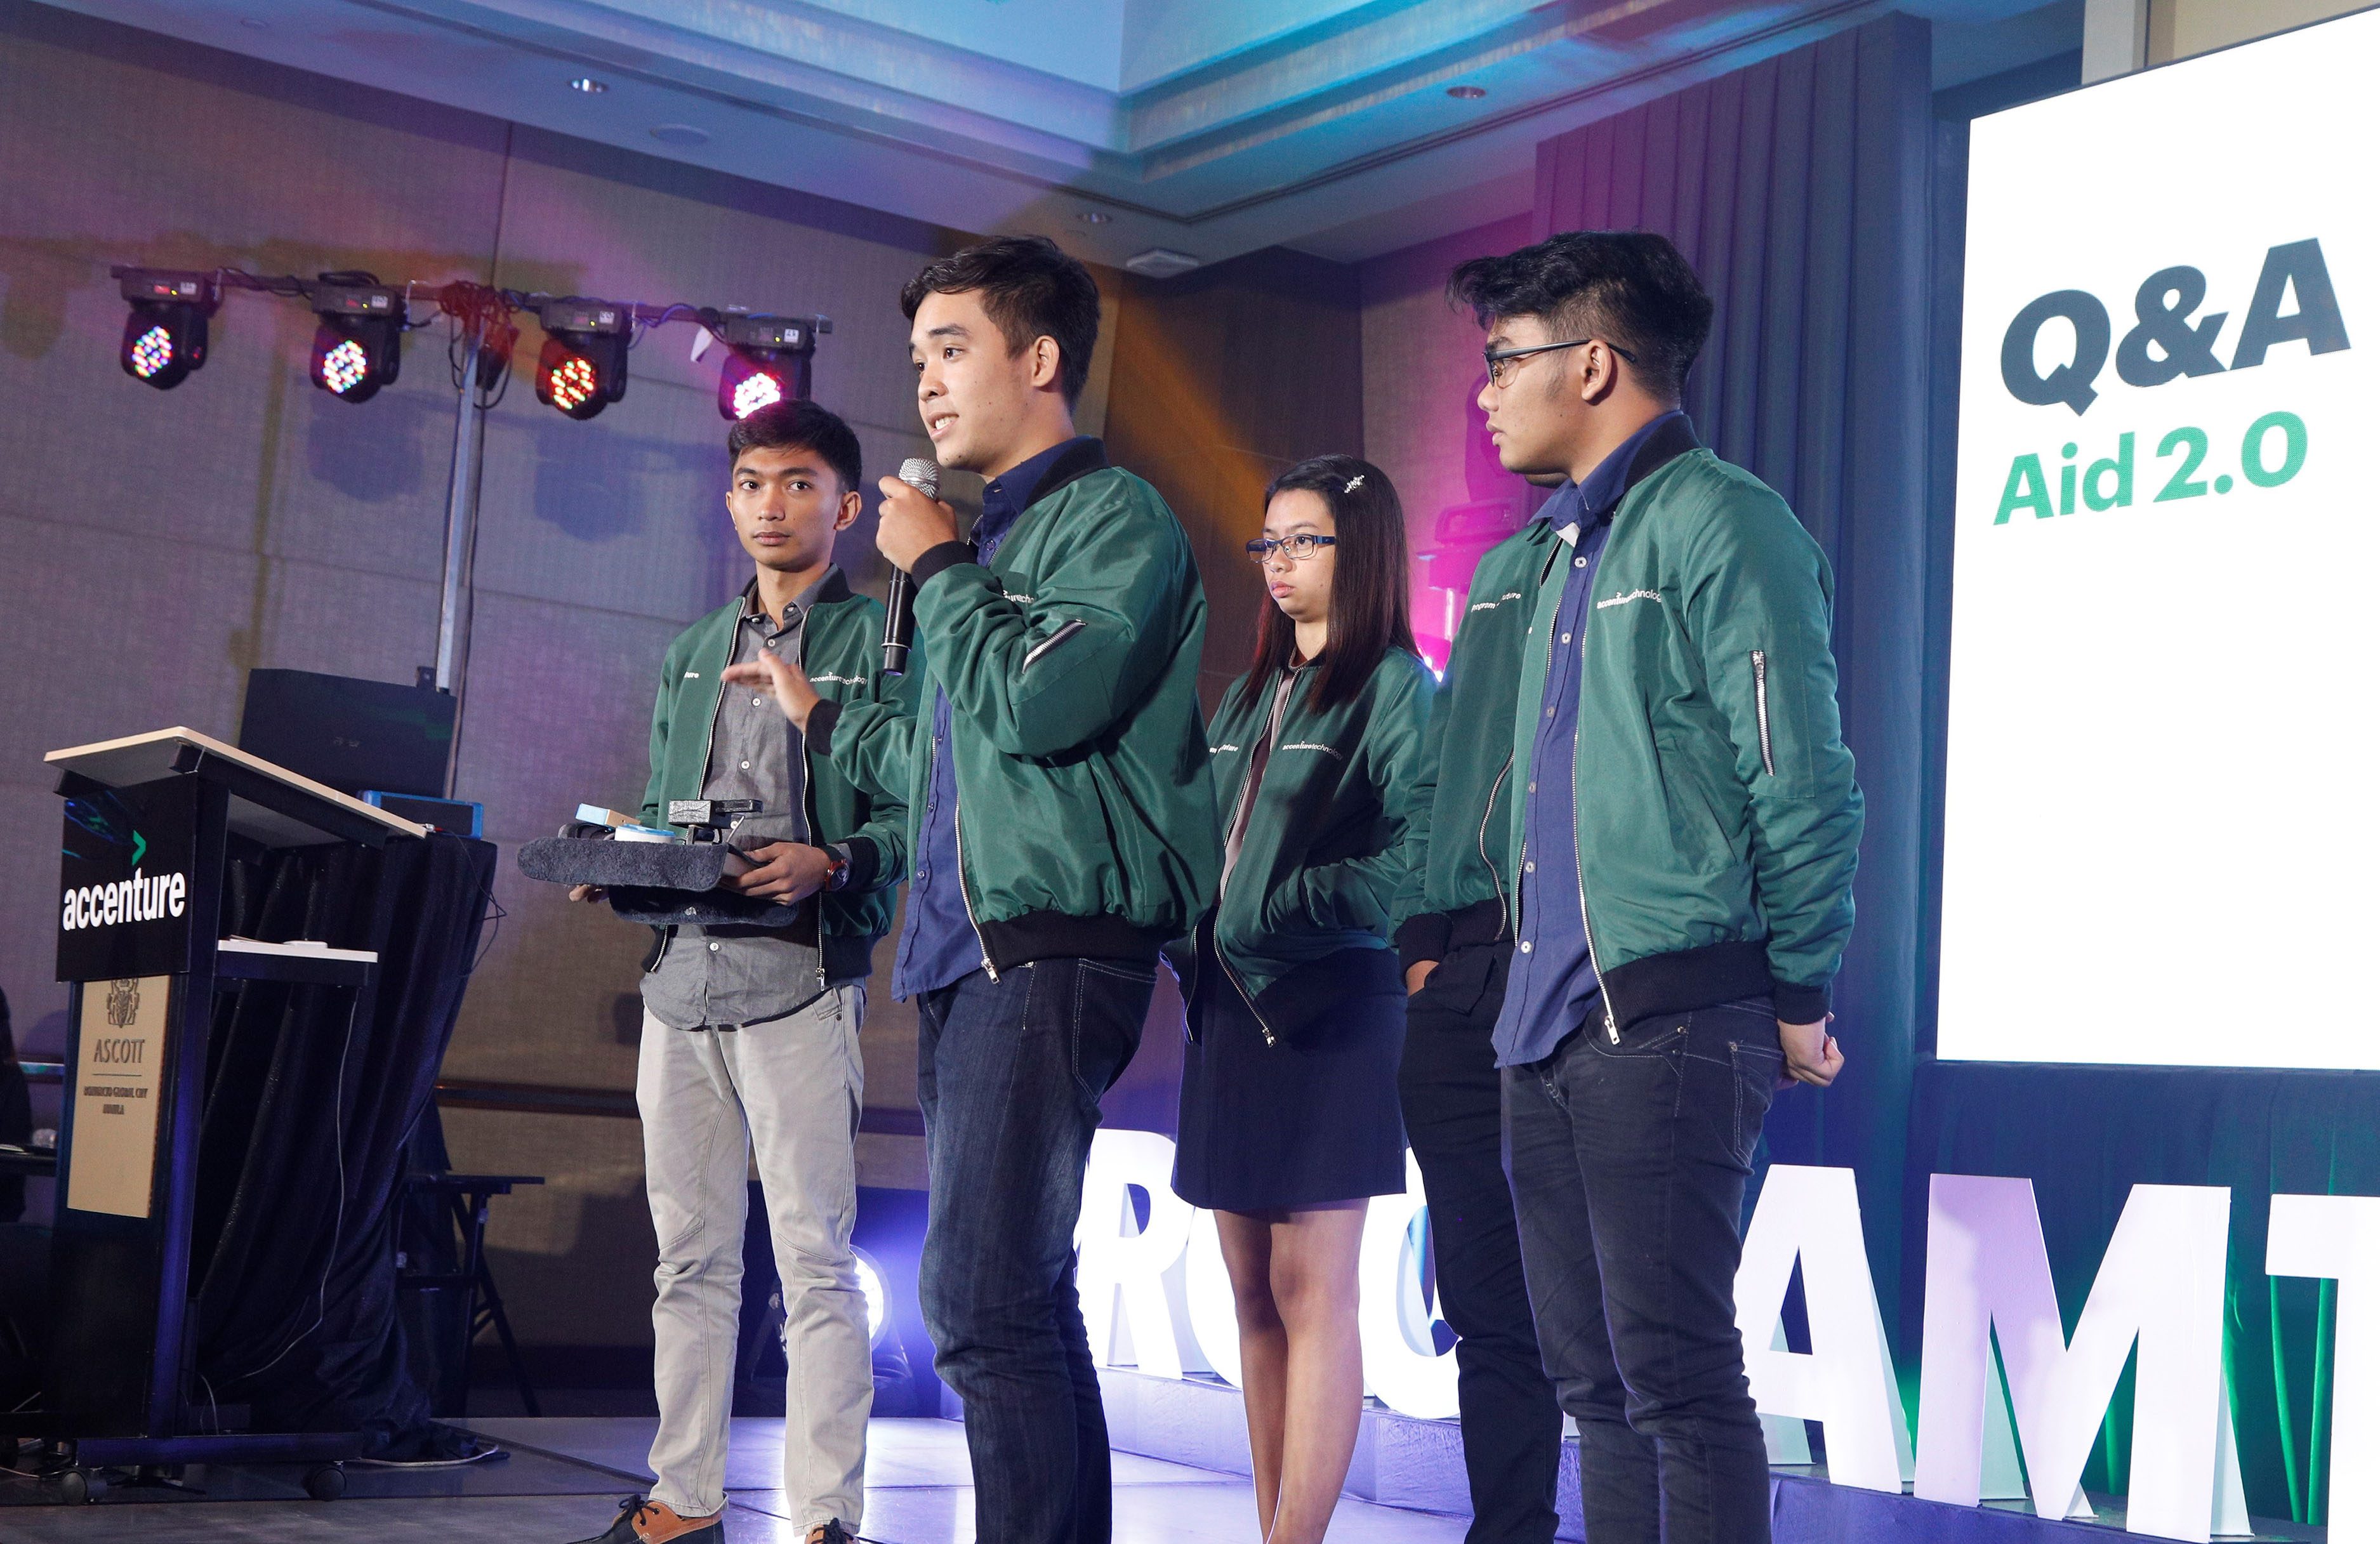  TEAM AID 2.0. The team from University of San Carlos – Cebu answers questions about their device, Tactus. Photo courtesy of Accenture.